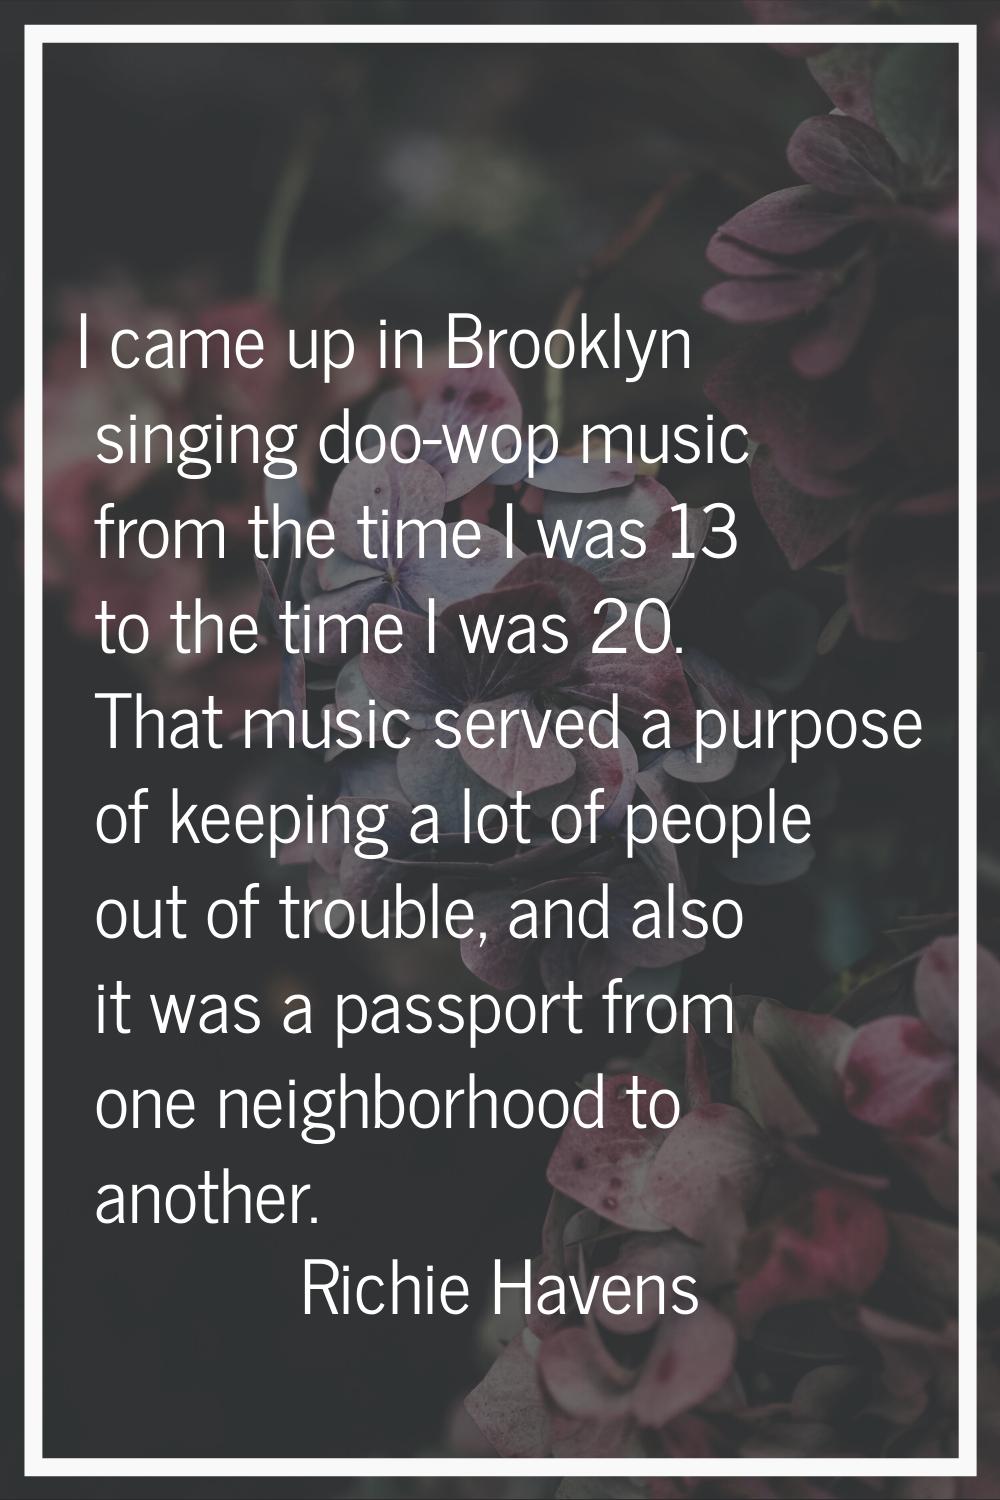 I came up in Brooklyn singing doo-wop music from the time I was 13 to the time I was 20. That music